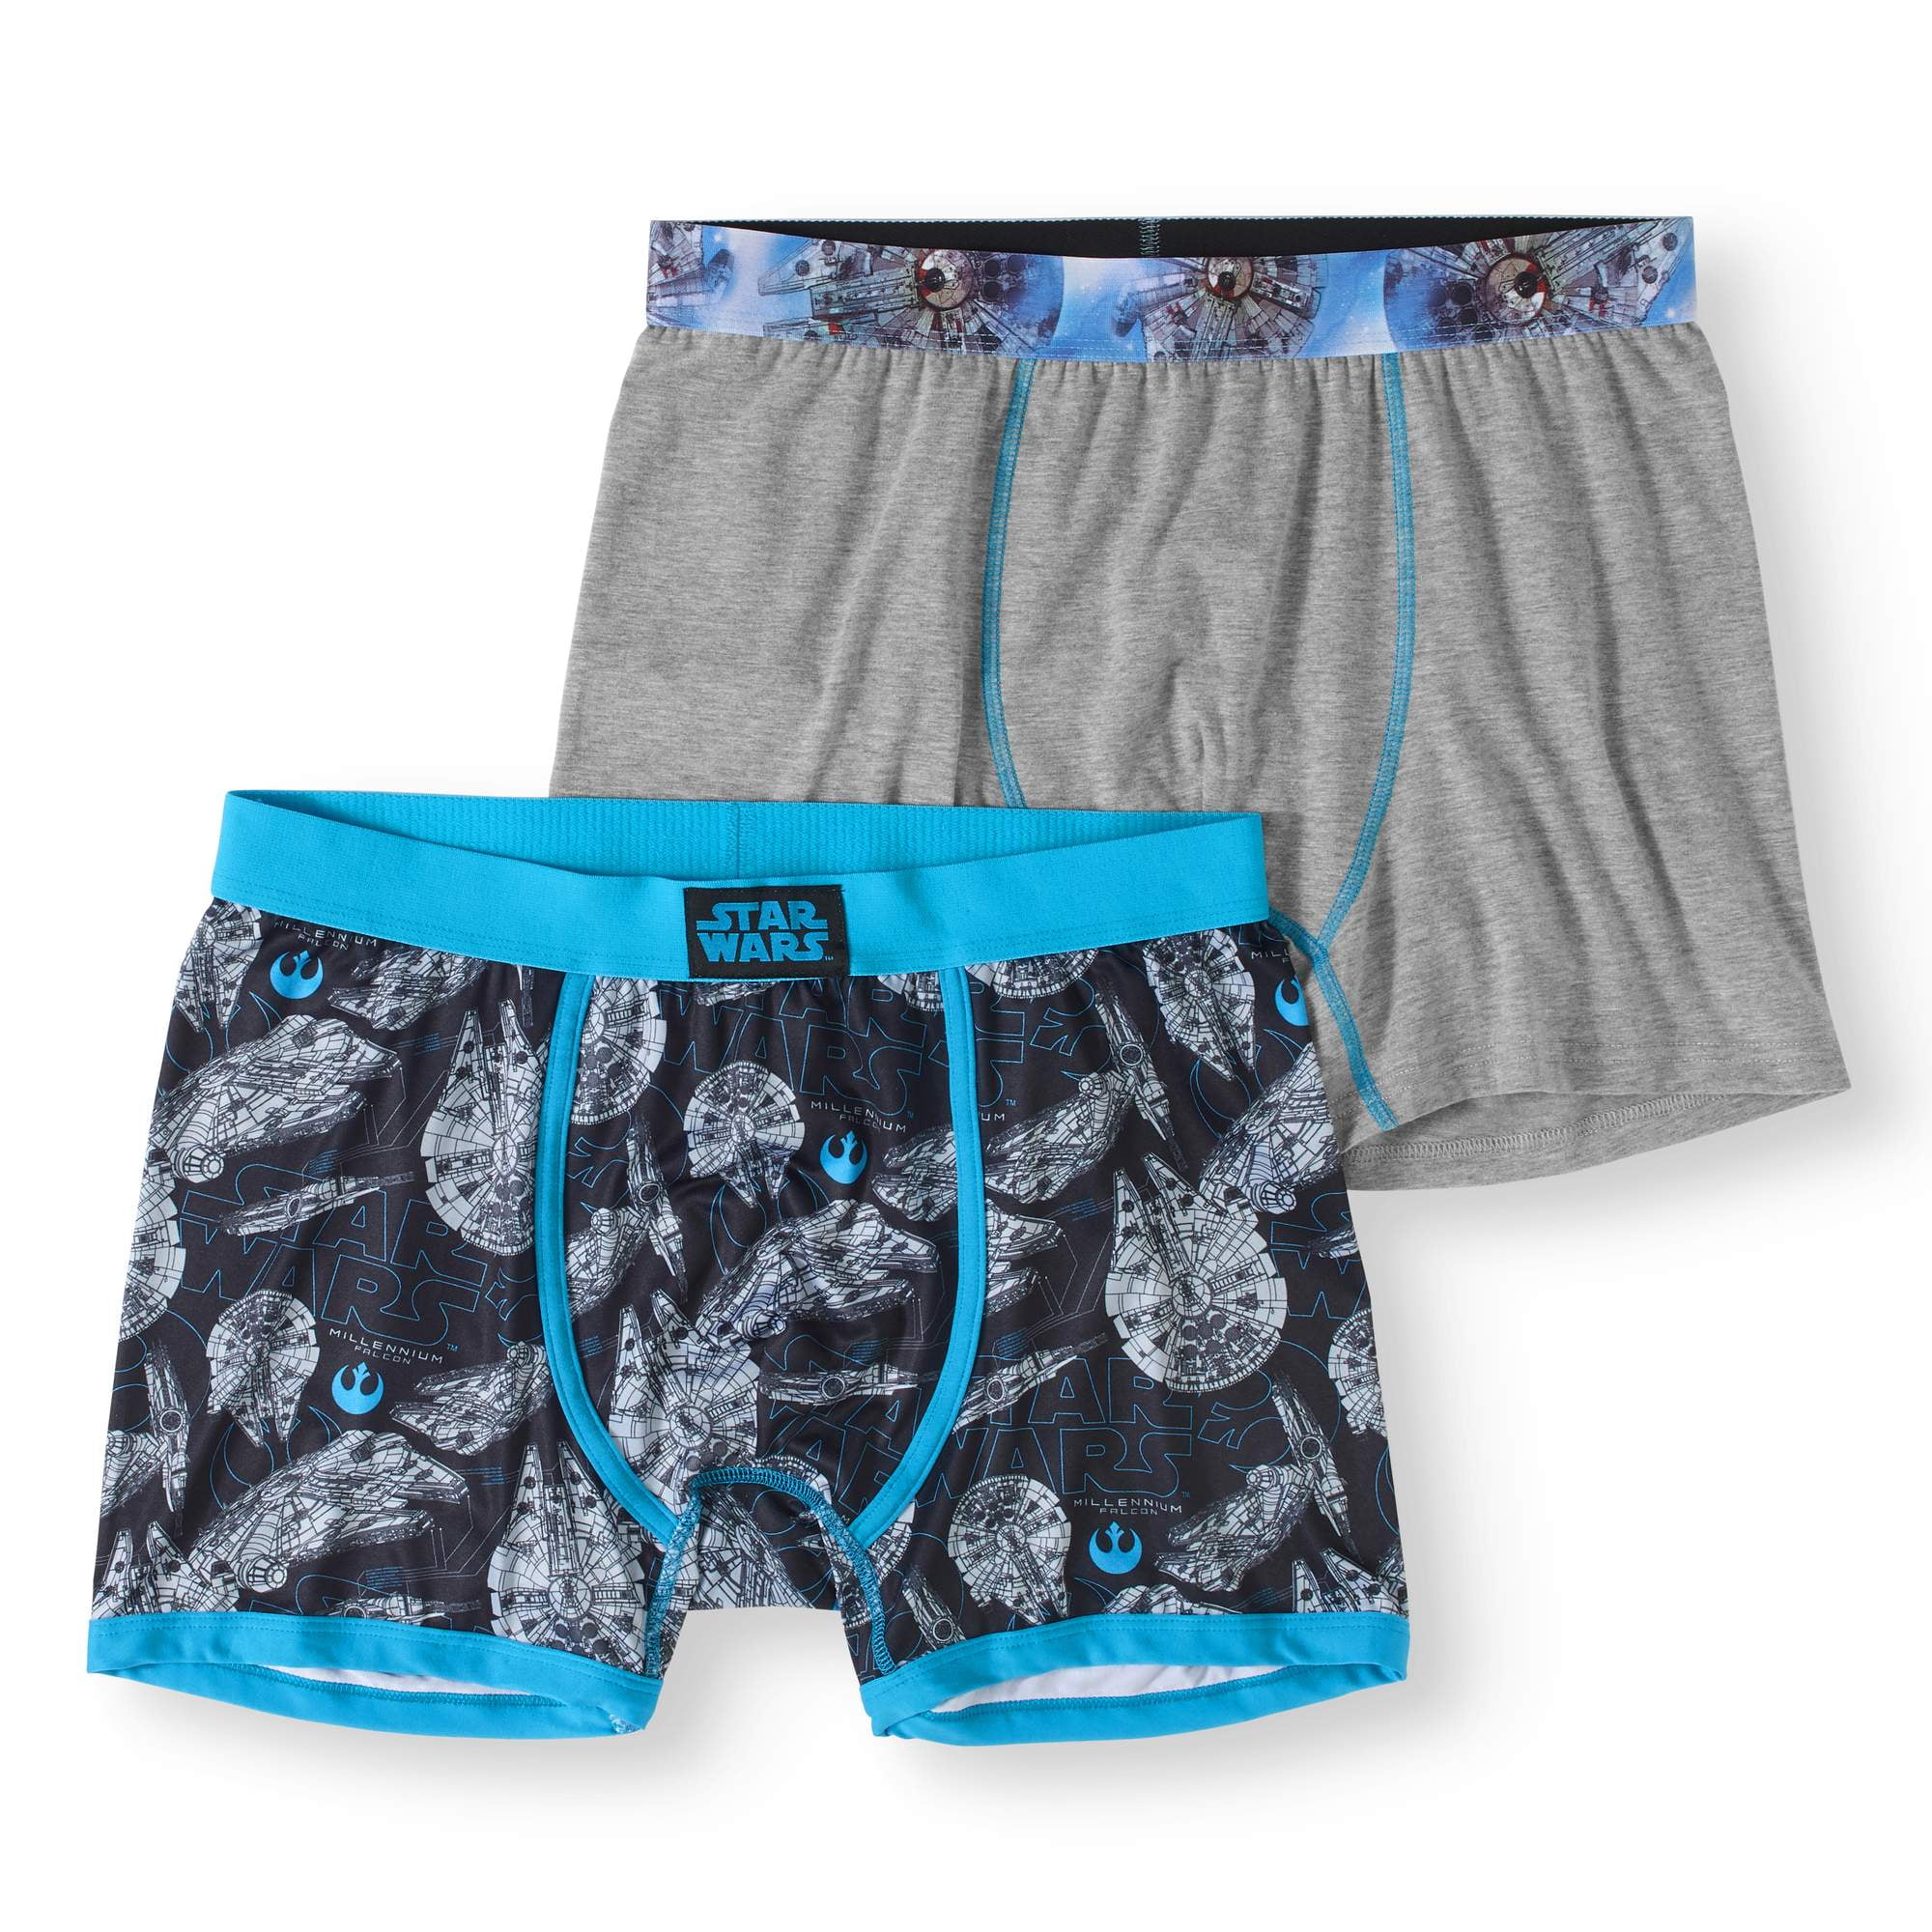 XS-3XL INTERESTPRINT Mens All-Over Print Boxer Briefs Dark Pattern with Colorful Dragonflies